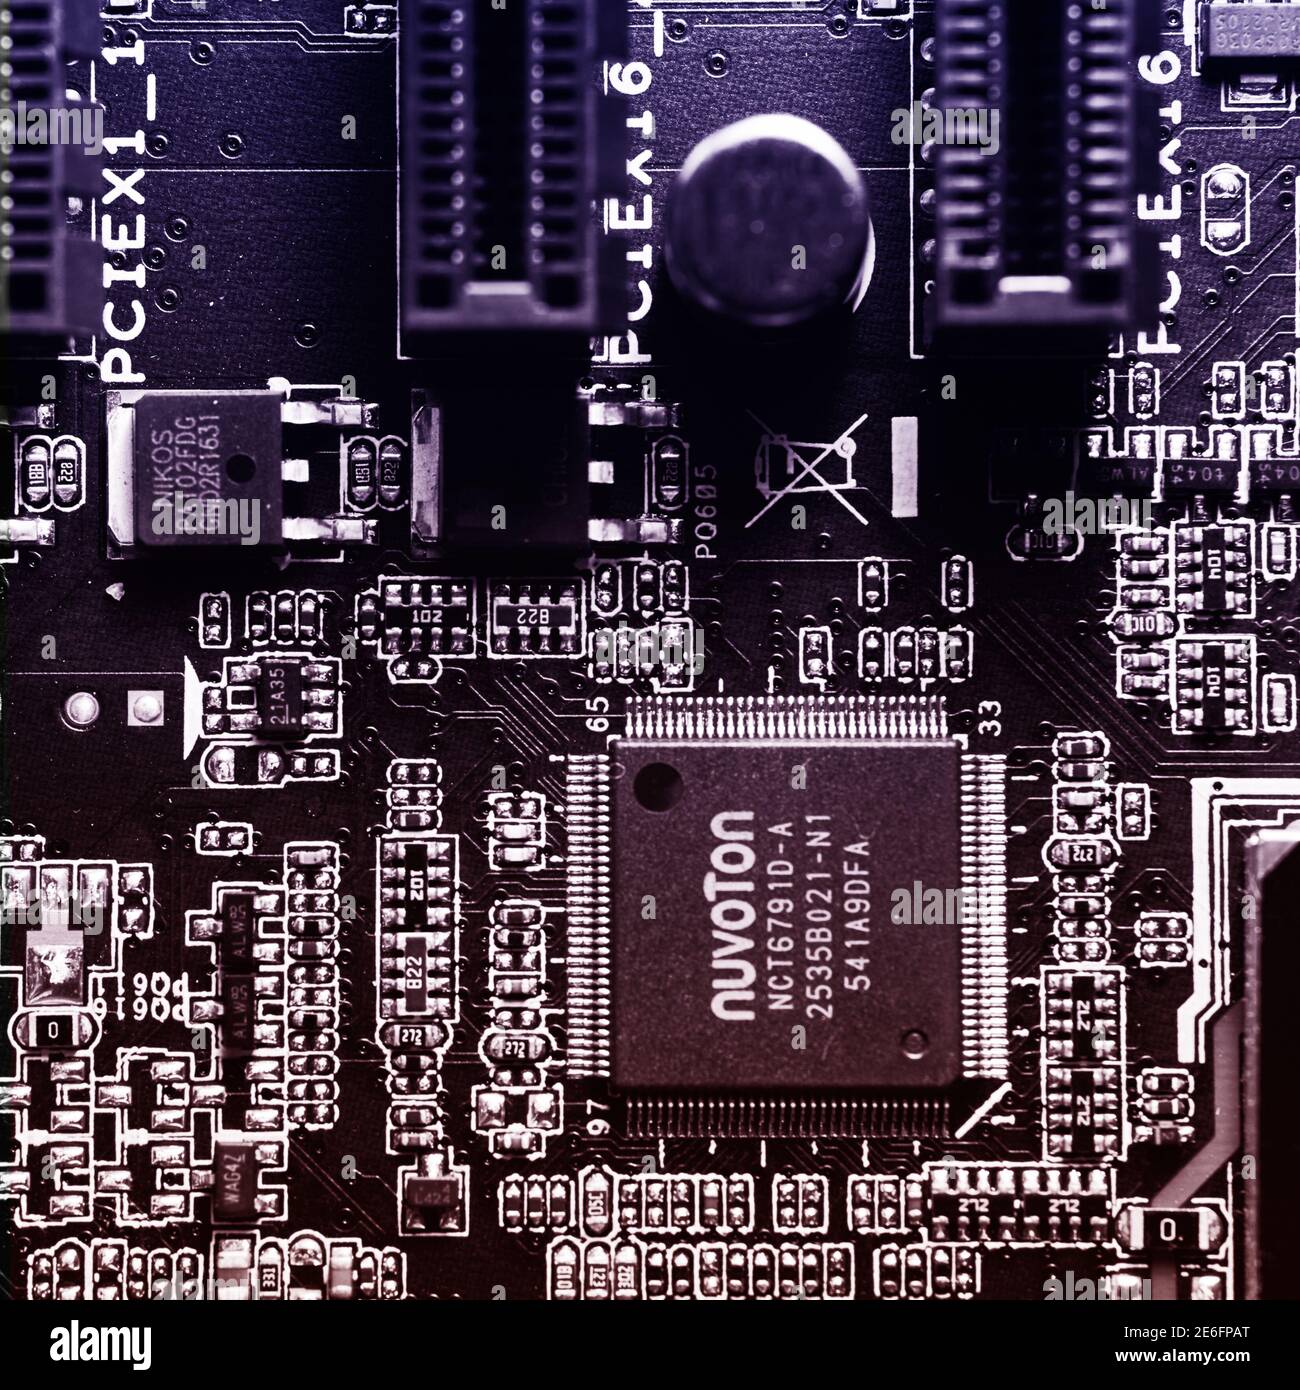 Gifhorn, Germany, Januara 16., 2021: Close-up view of a motherboard with the main processor and CPU of the computing machine. Stock Photo